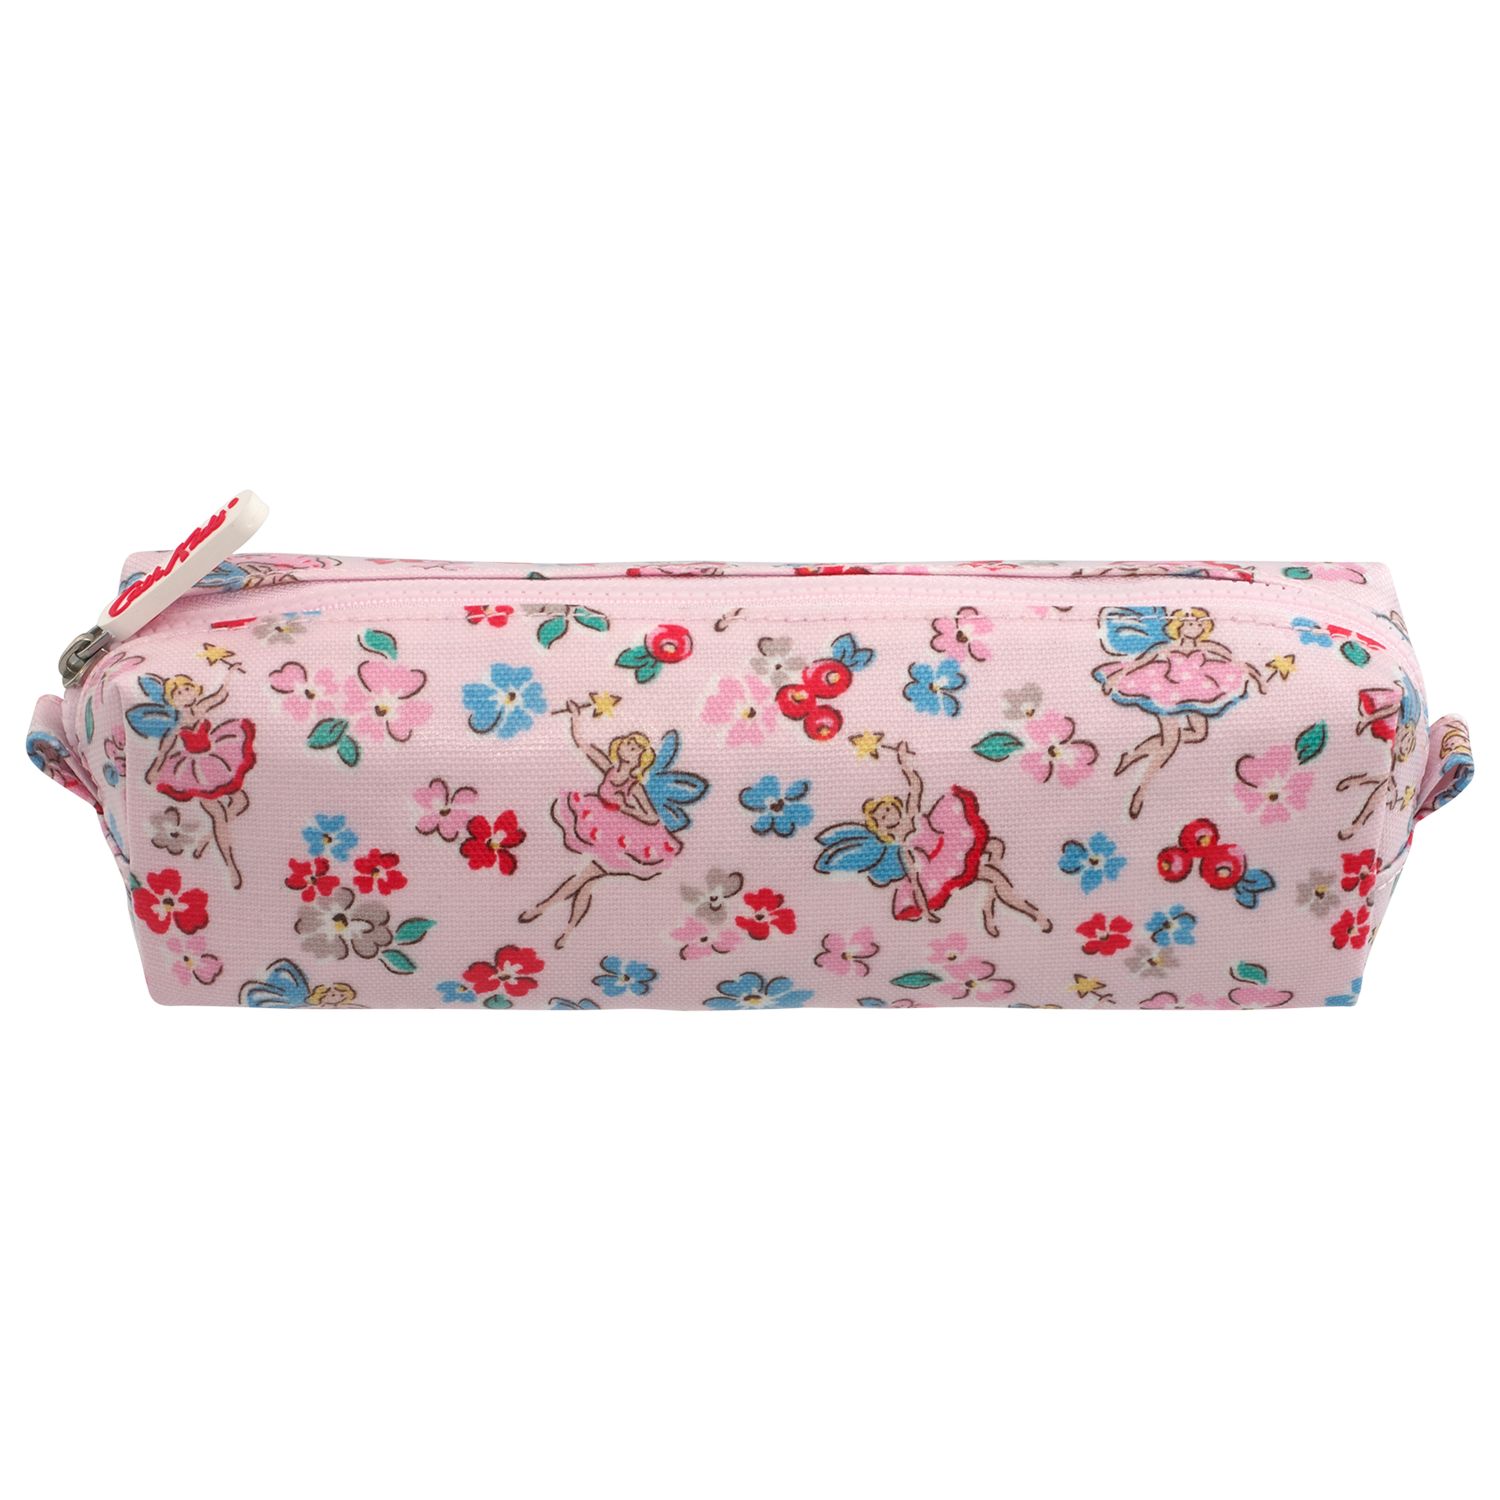 Pencil Cases | Stationery | Home & Garden | John Lewis